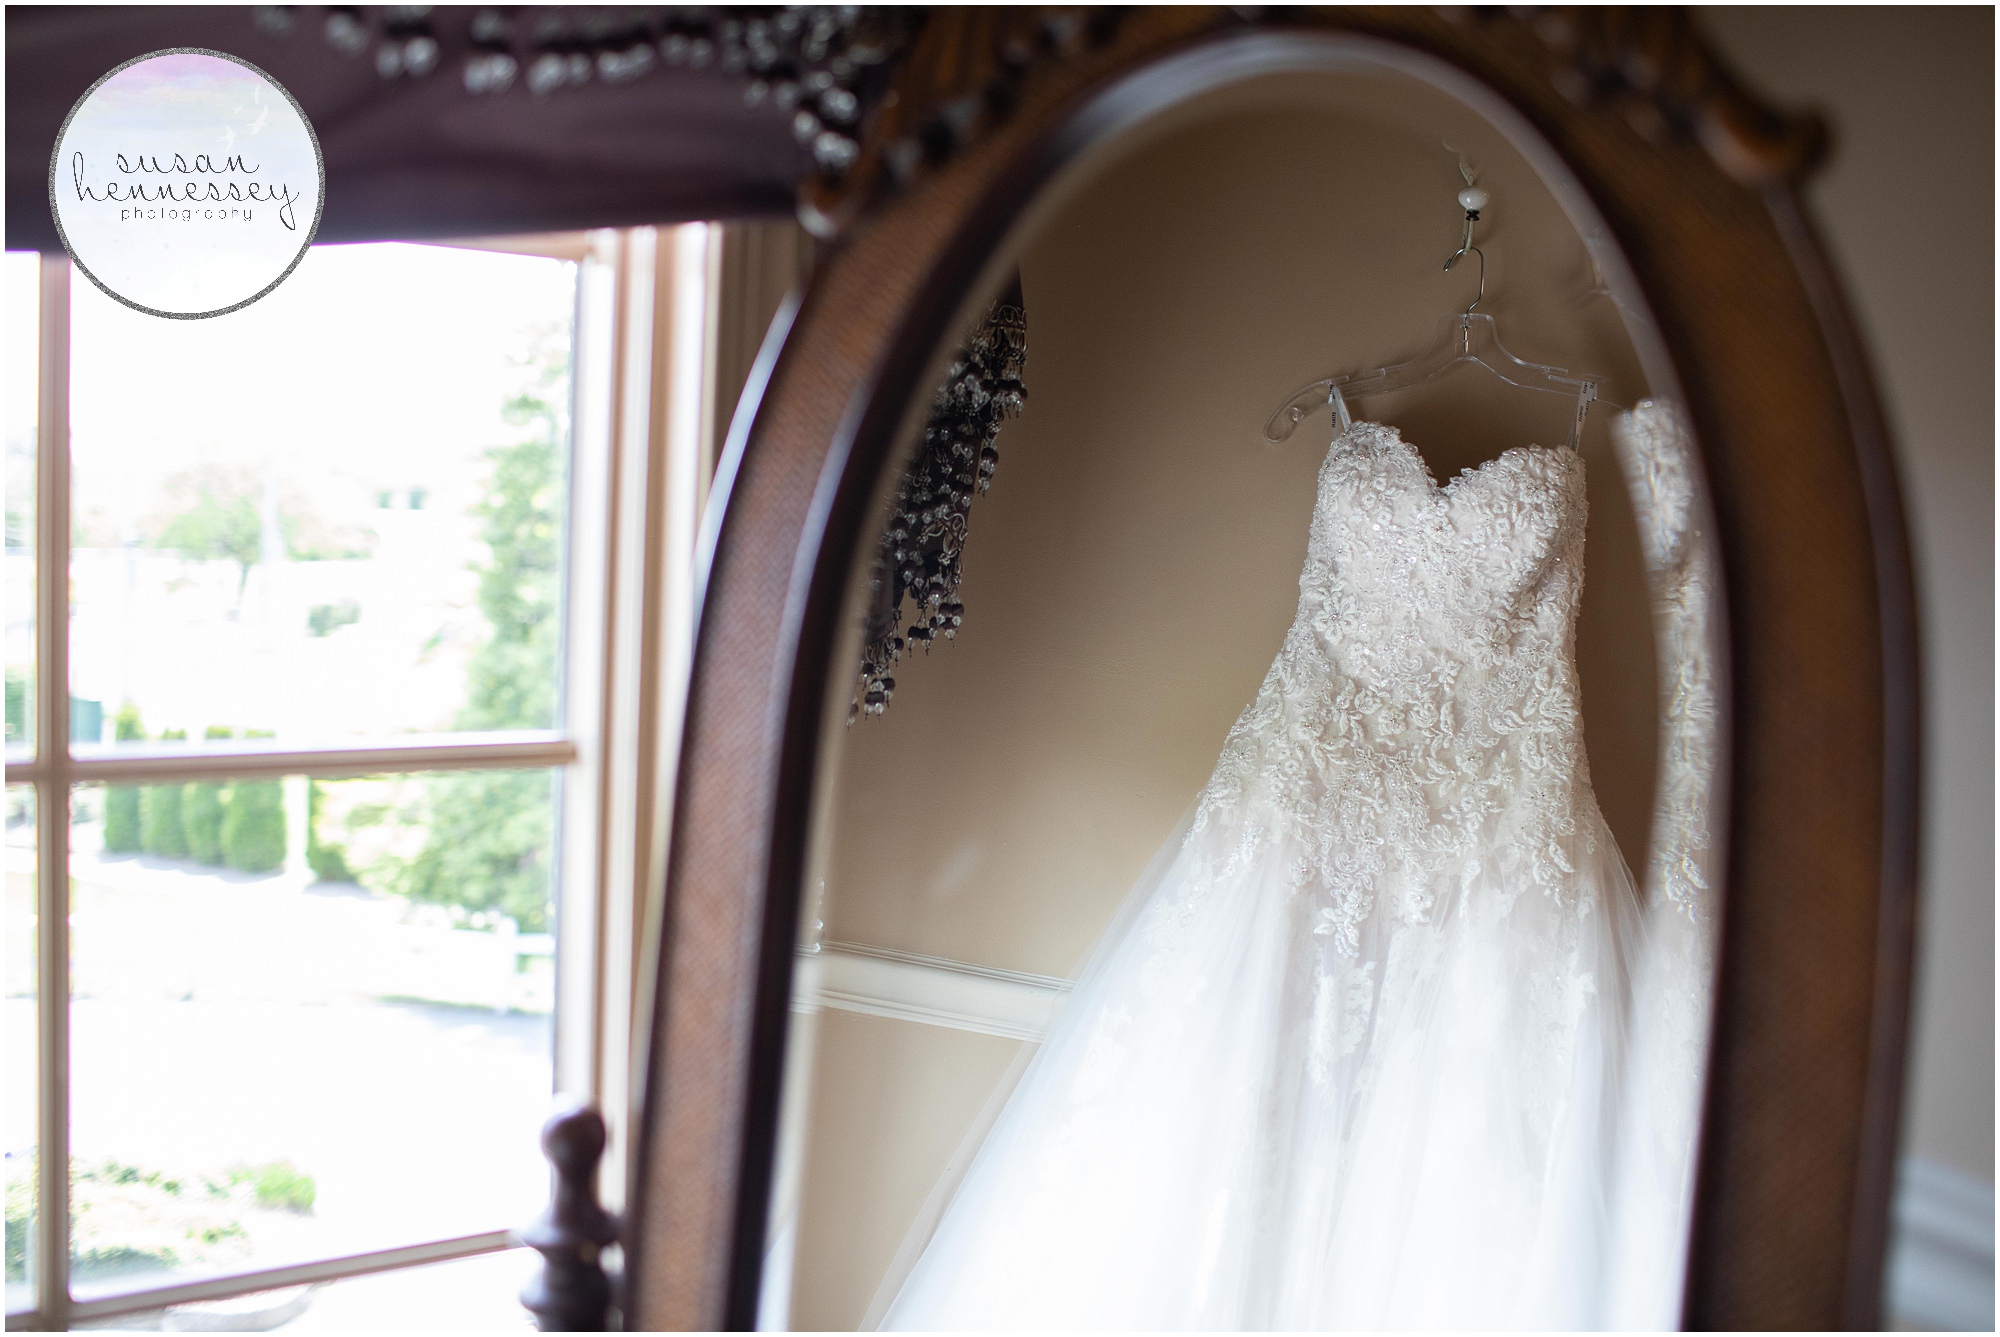 The bride's wedding dress hanging in bridal suite.